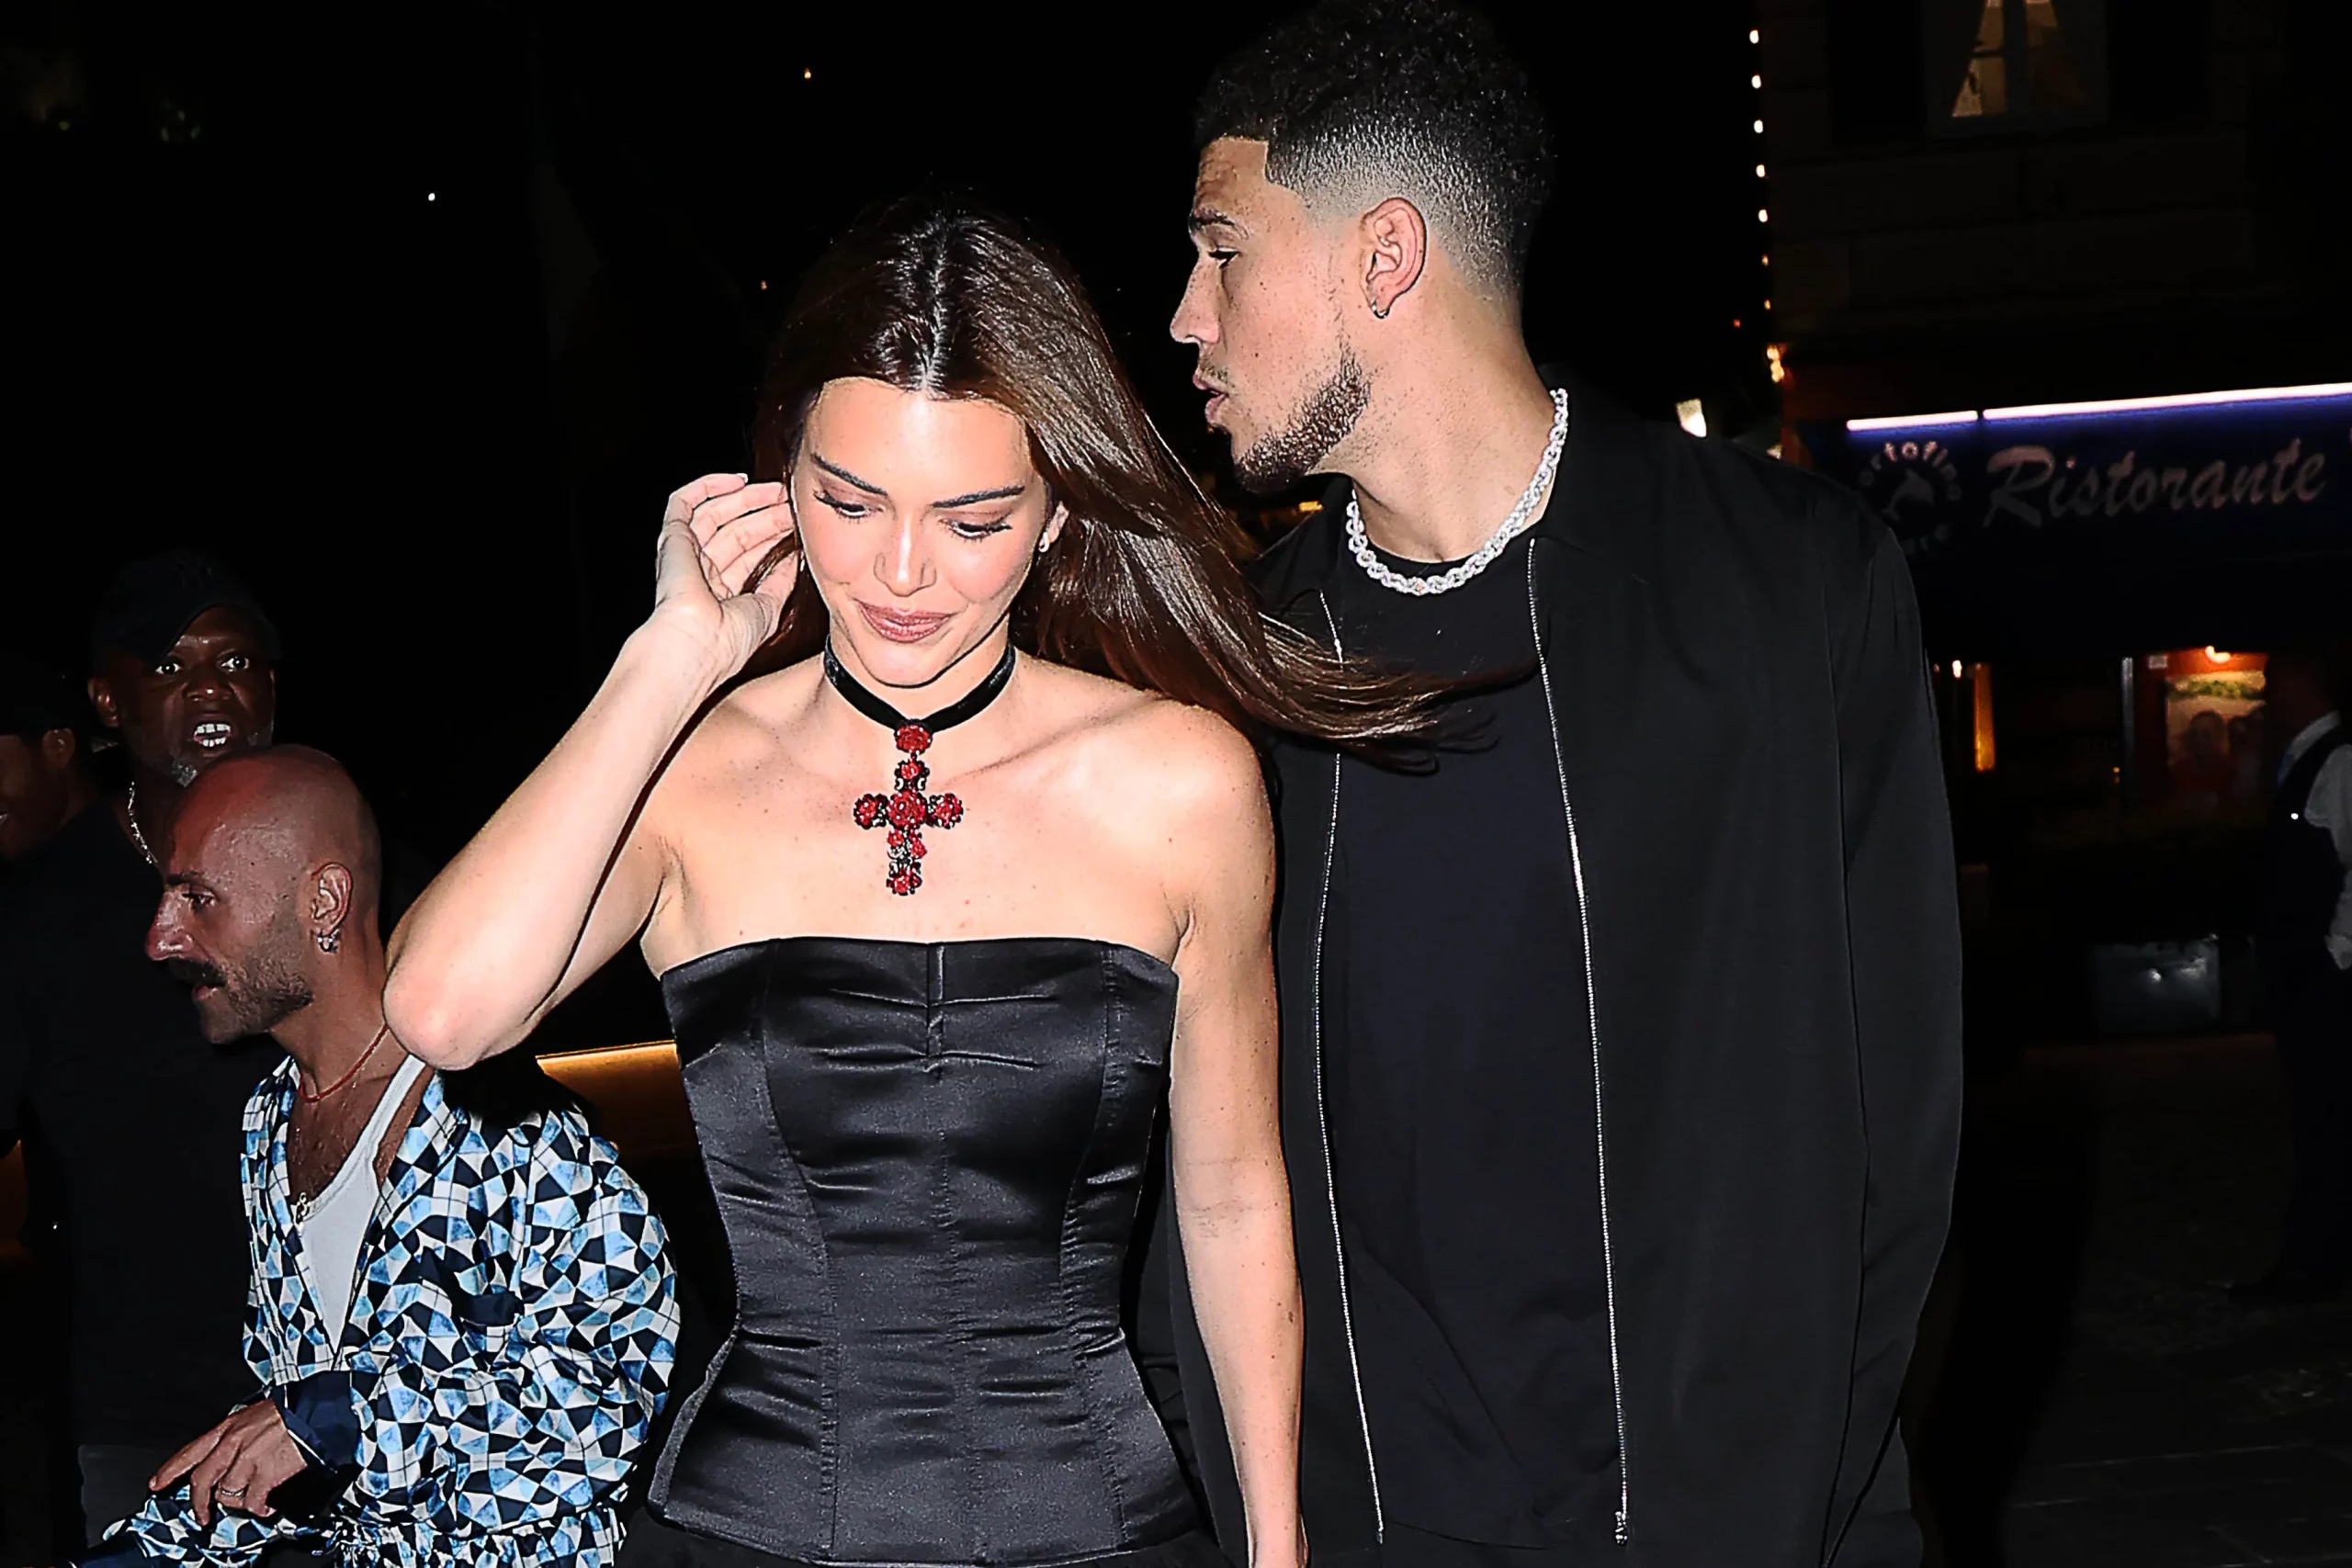 Kendall Jenner Pose Nude in New Photo After Breakup With Devin Booker